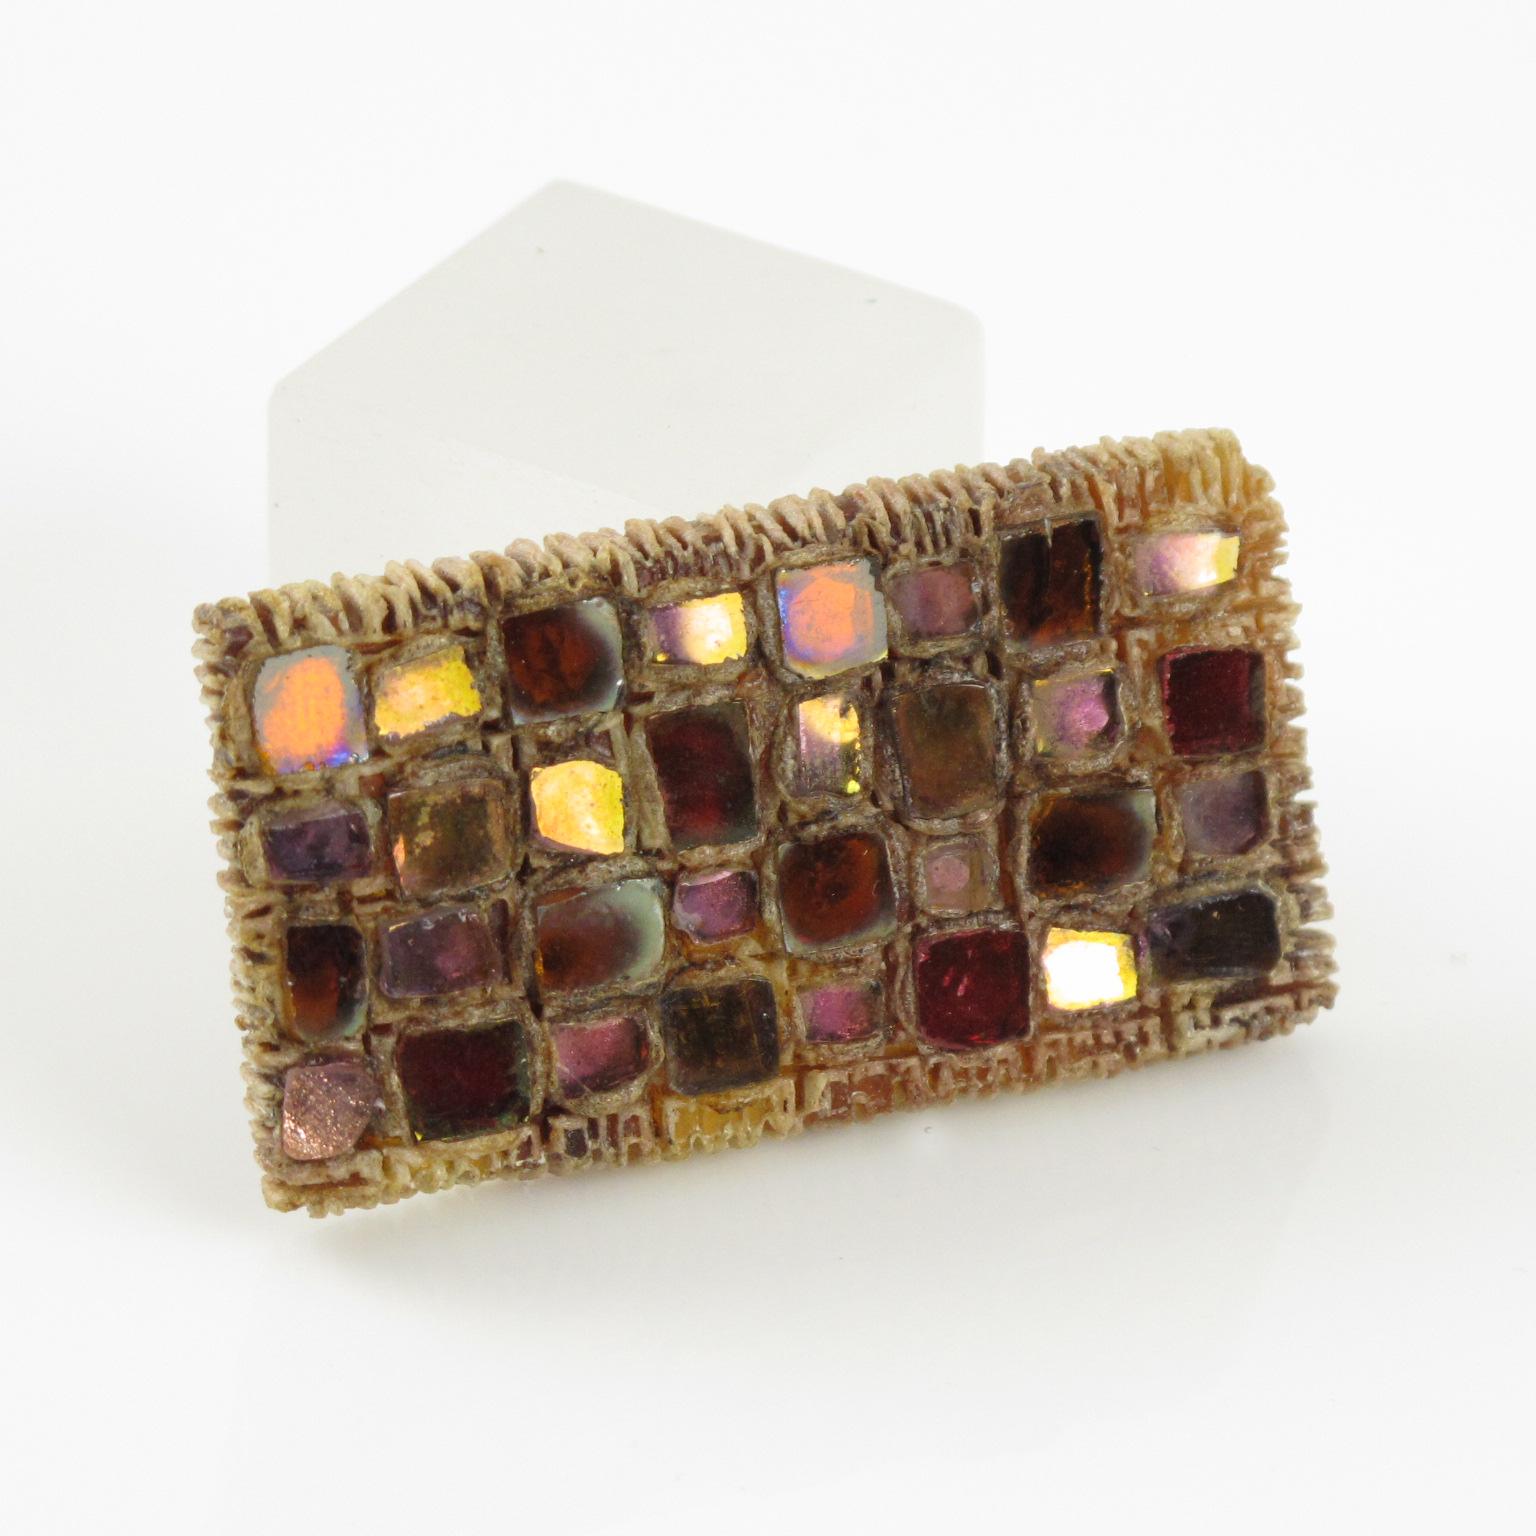 This stunning Line Vautrin geometric Talosel brooch pin features an encrusted rectangular shape with pink-colored mirrored glass in a checkerboard pattern. The glass associated with Talosel is a unique technique created by Line Vautrin, in which she